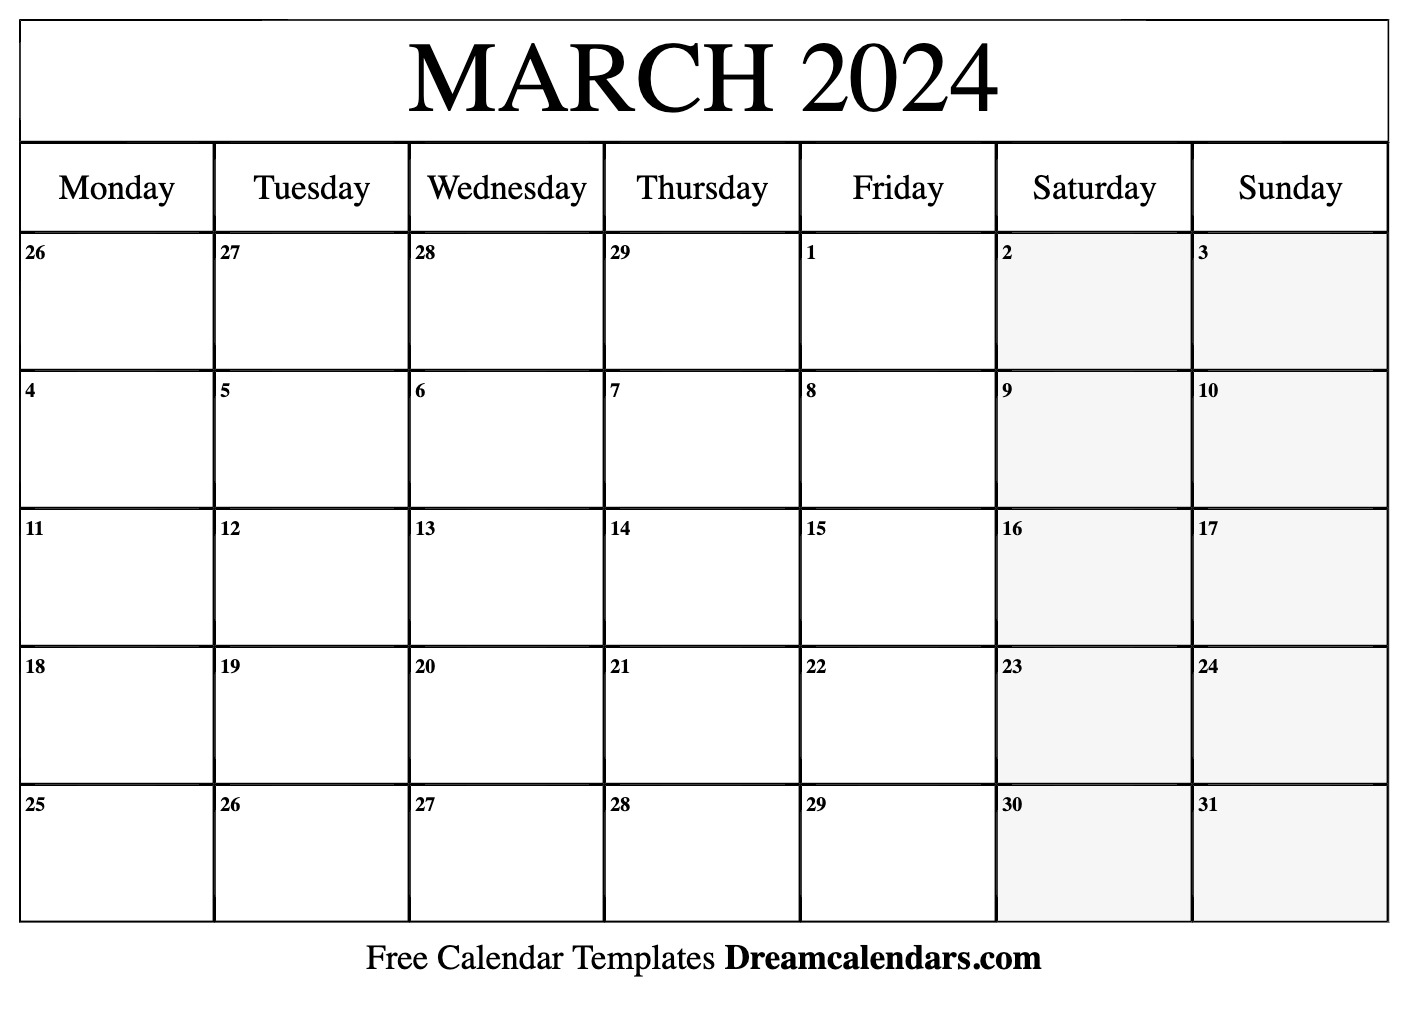 march-2024-calendar-free-blank-printable-with-holidays